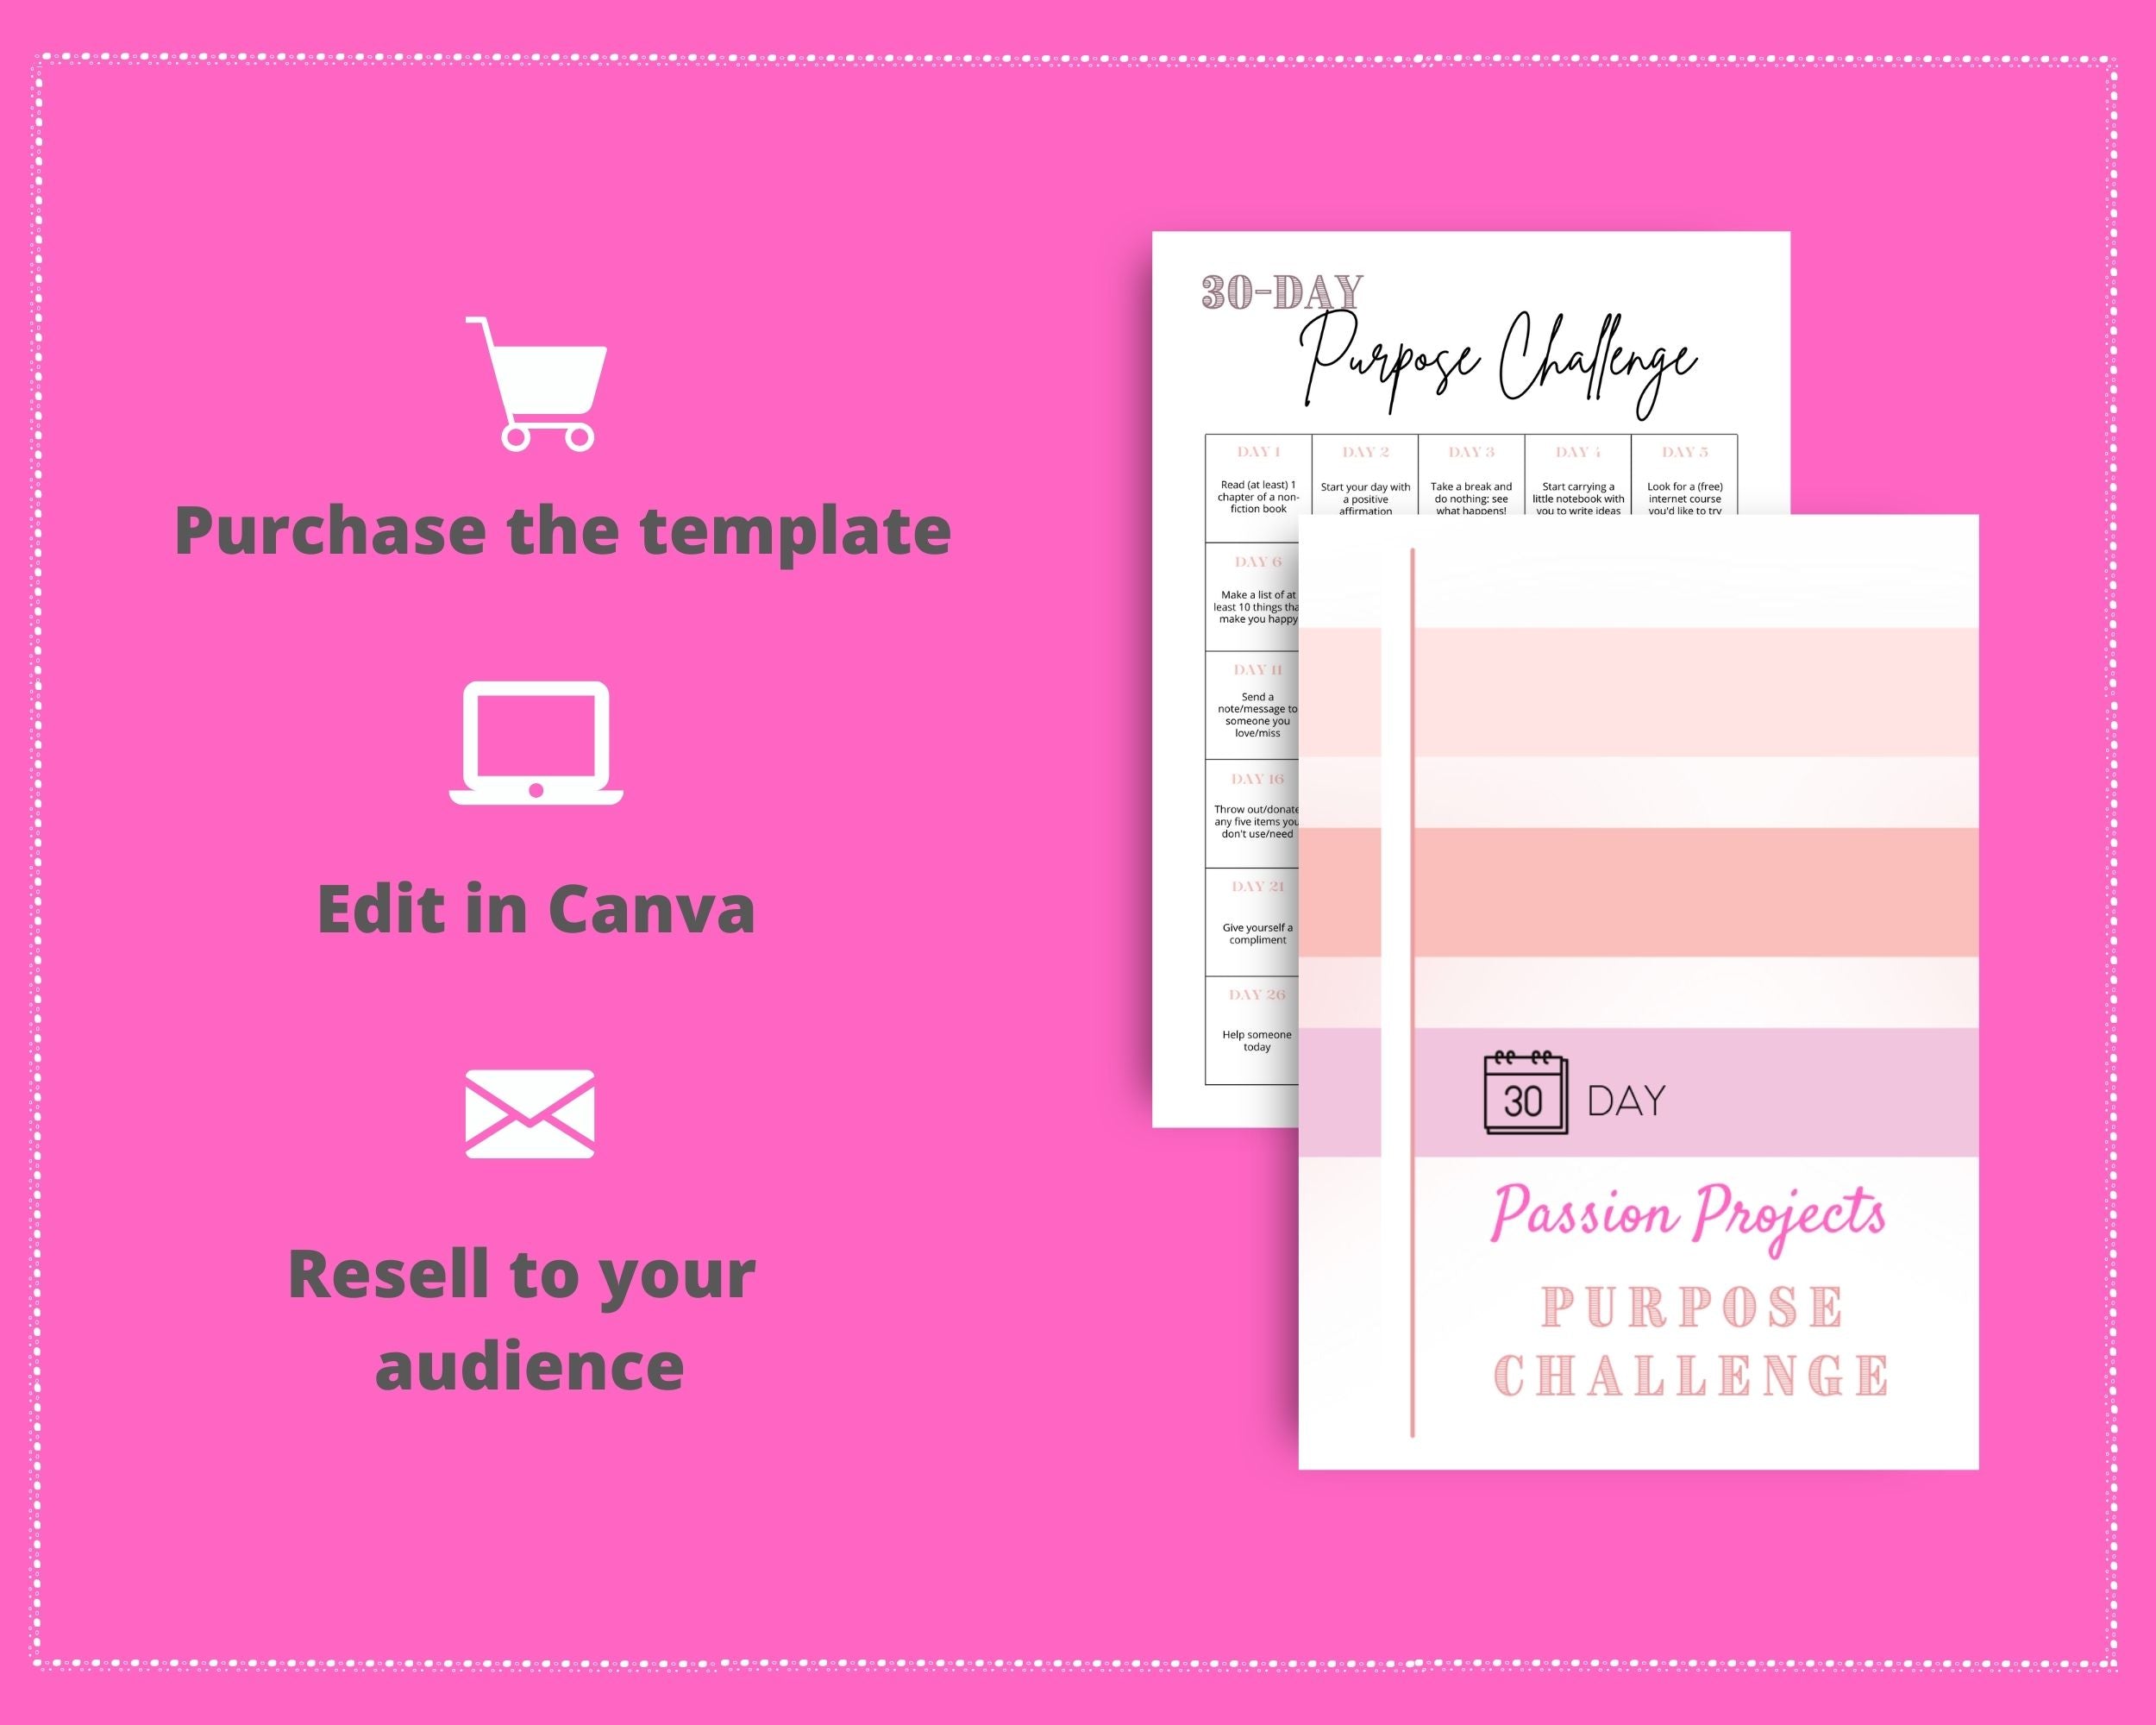 30-Day Passion Projects Purpose Challenge | Editable Canva Template A4 Size